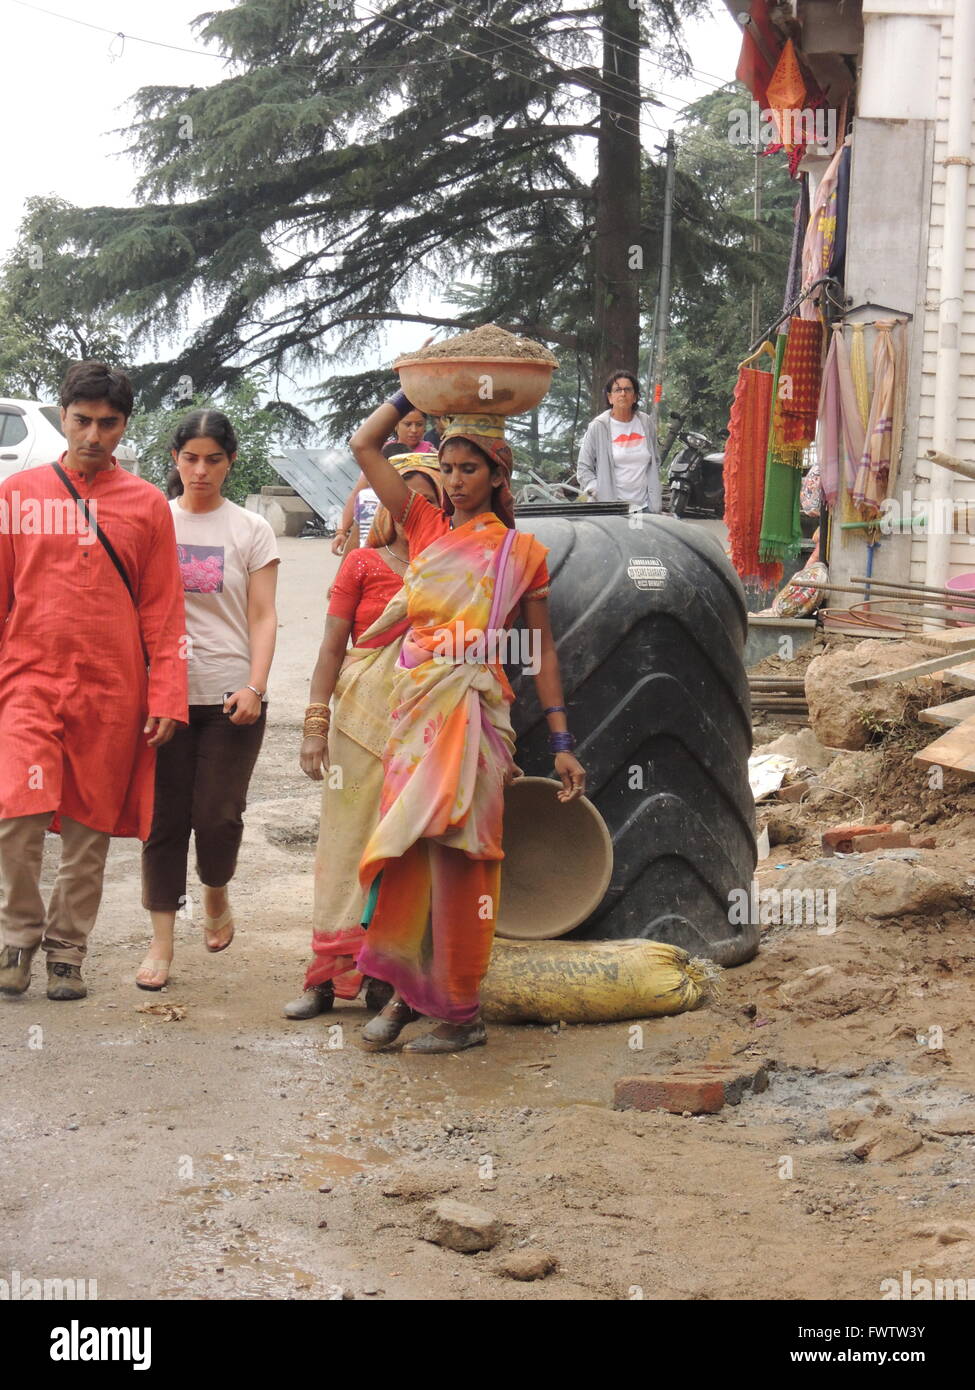 Poor Indian woman carries rubble on her head working at a construction site, a wealthy Indian woman in western dress walks past Stock Photo